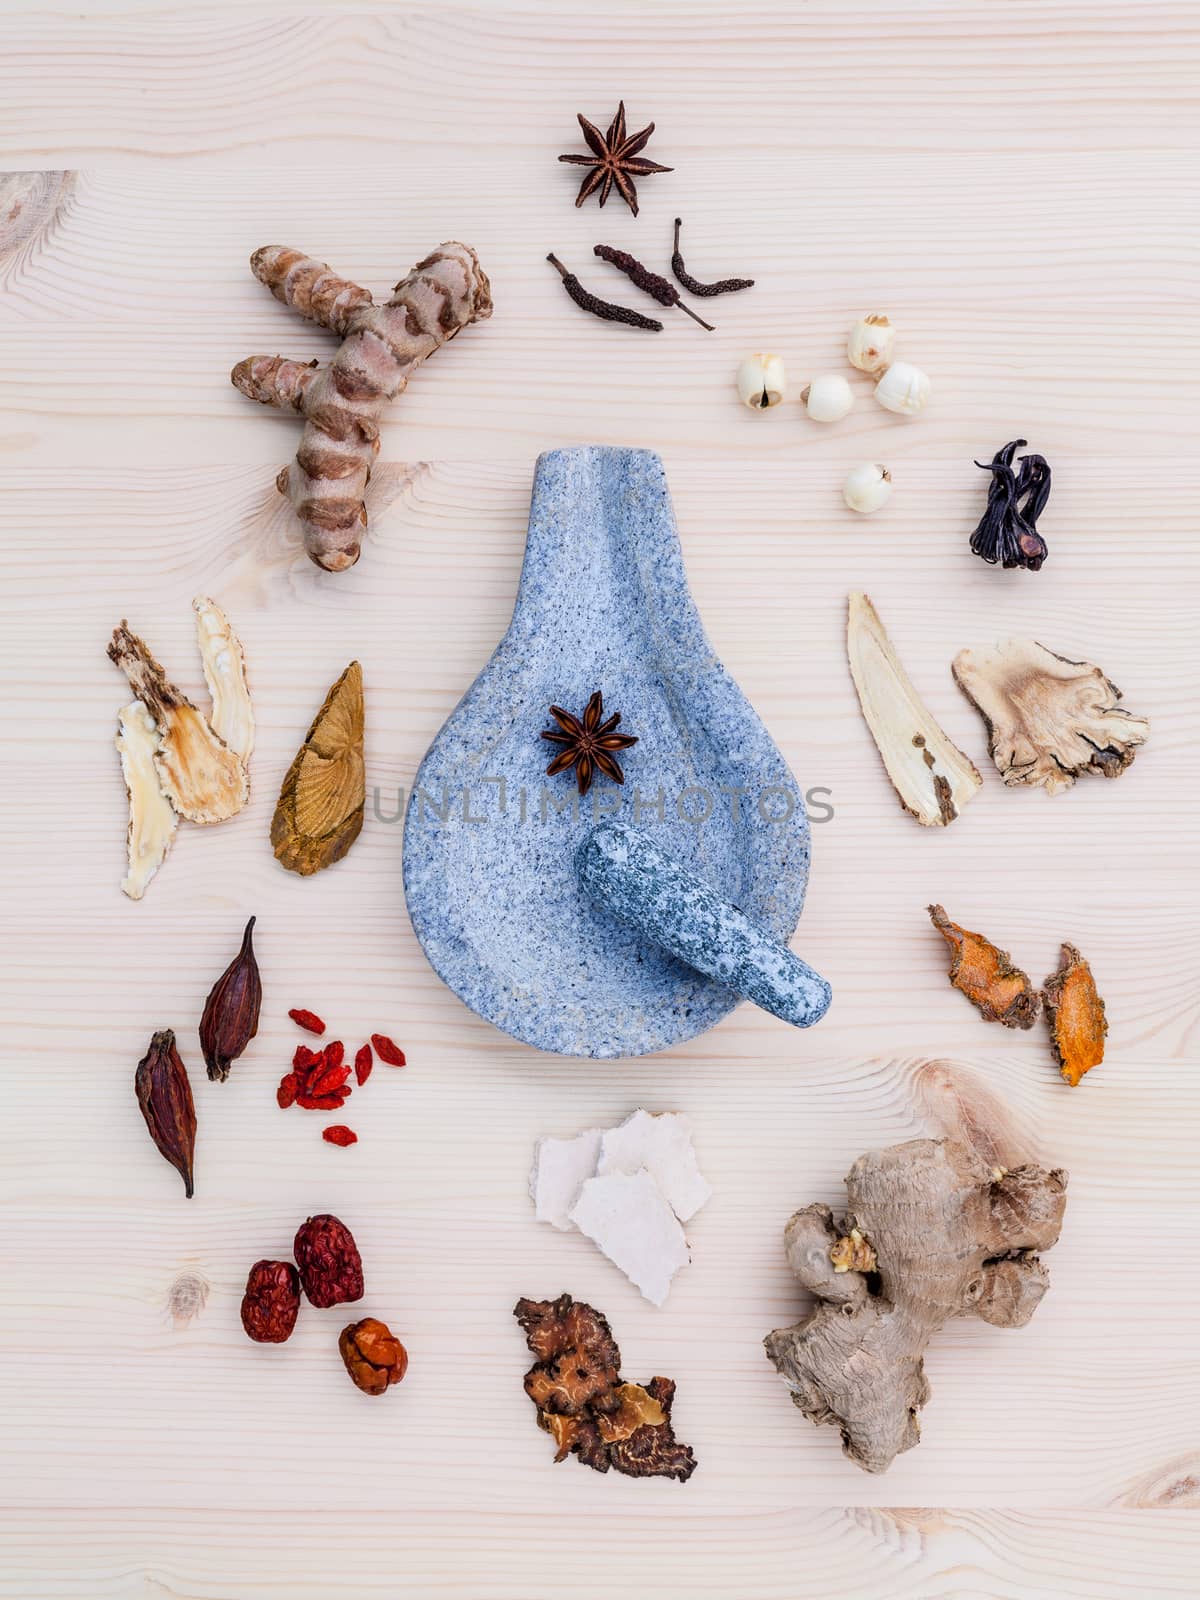 Alternative medicinal dried various Chinese herbs for healthy recipe ginseng ,goji berry ,ginger ,turmeric ,lotus seed ,star anise ,monkey apple and long pepper with mortar on wooden background.